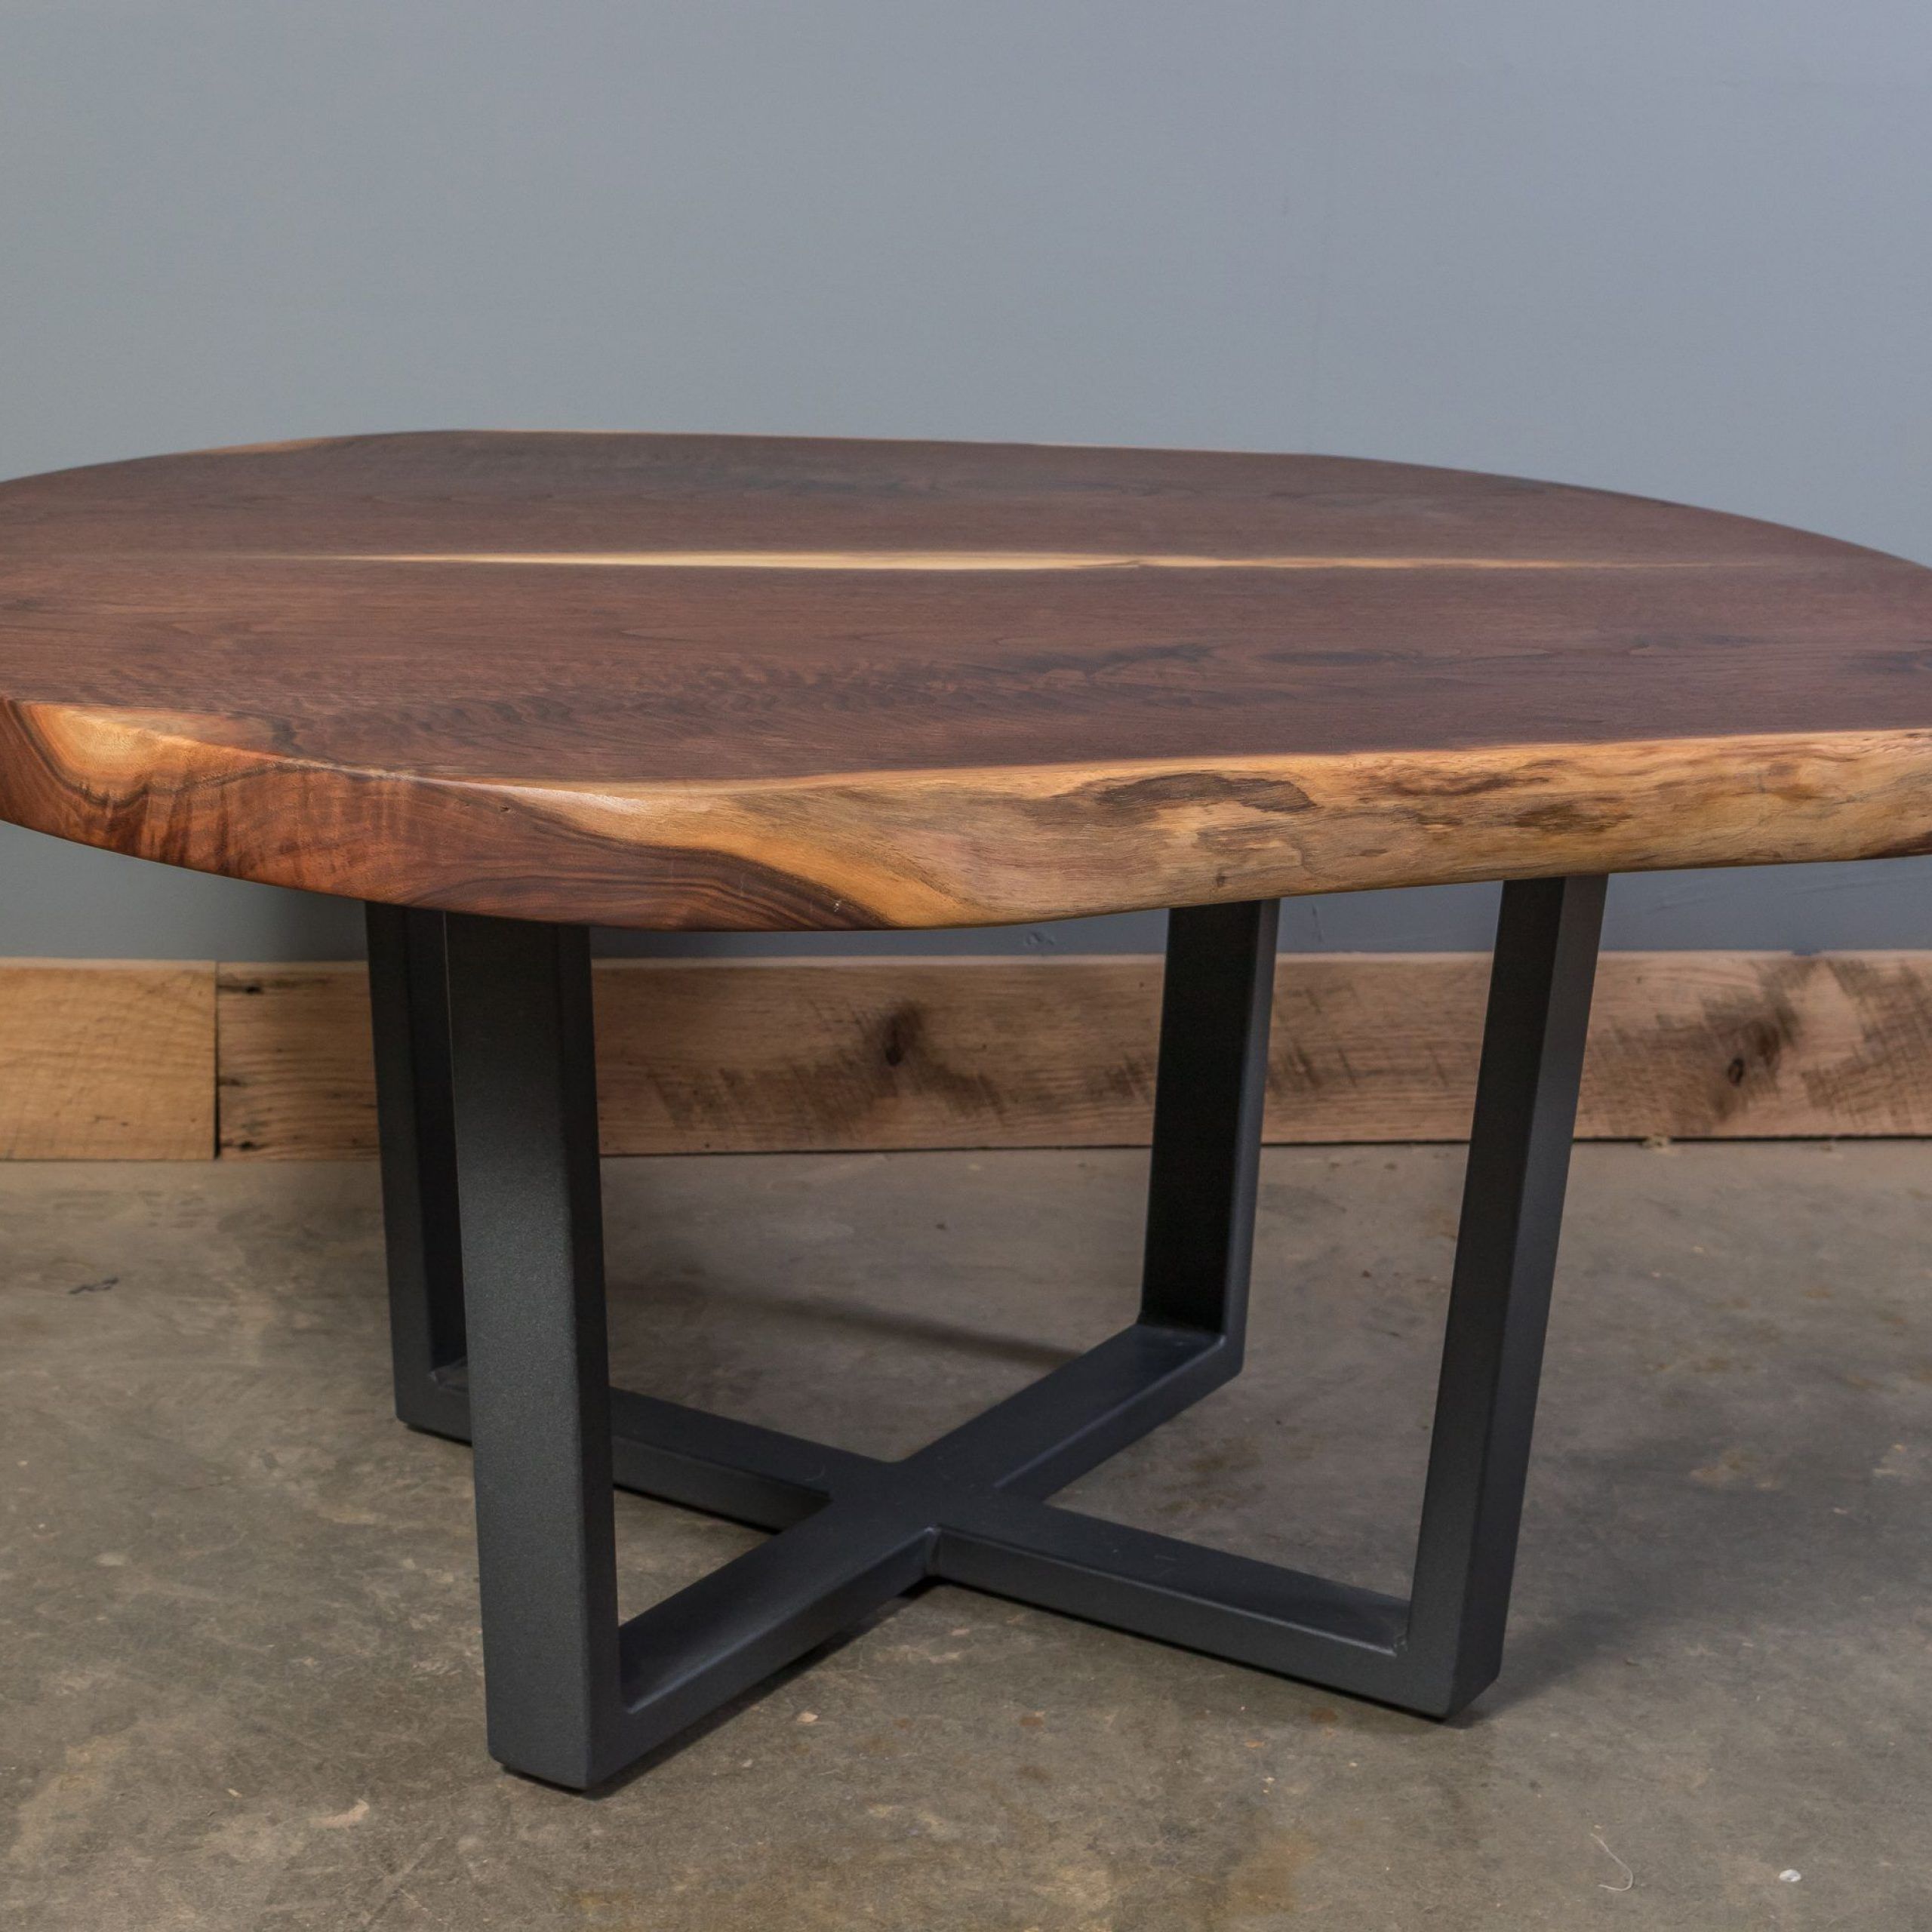 Famous Buy Handmade Live Edge Black Walnut Coffee Table, Made To In Walnut Coffee Tables (View 13 of 20)